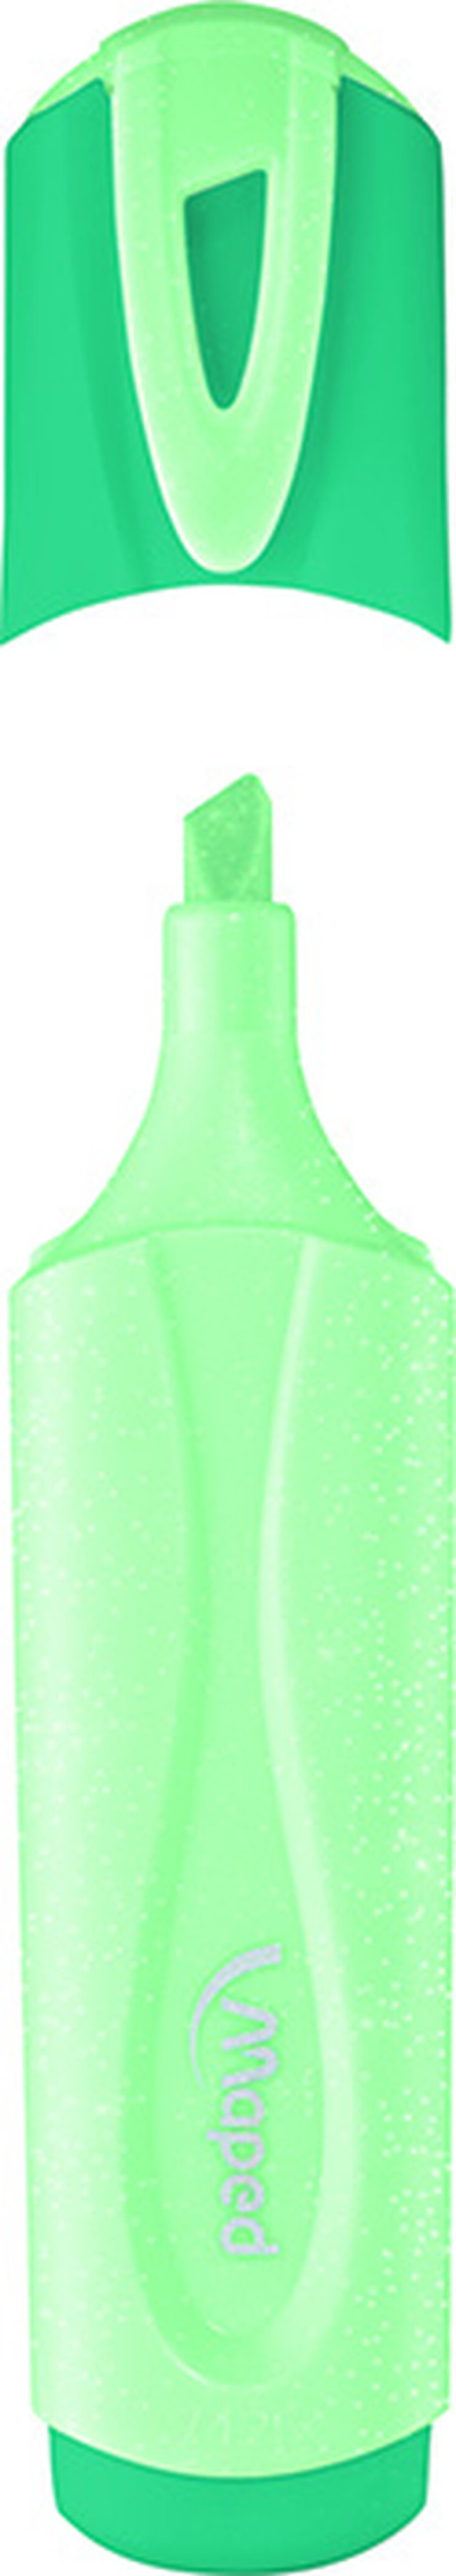 Rotuladores Maped Fluor Glitter 4 colors